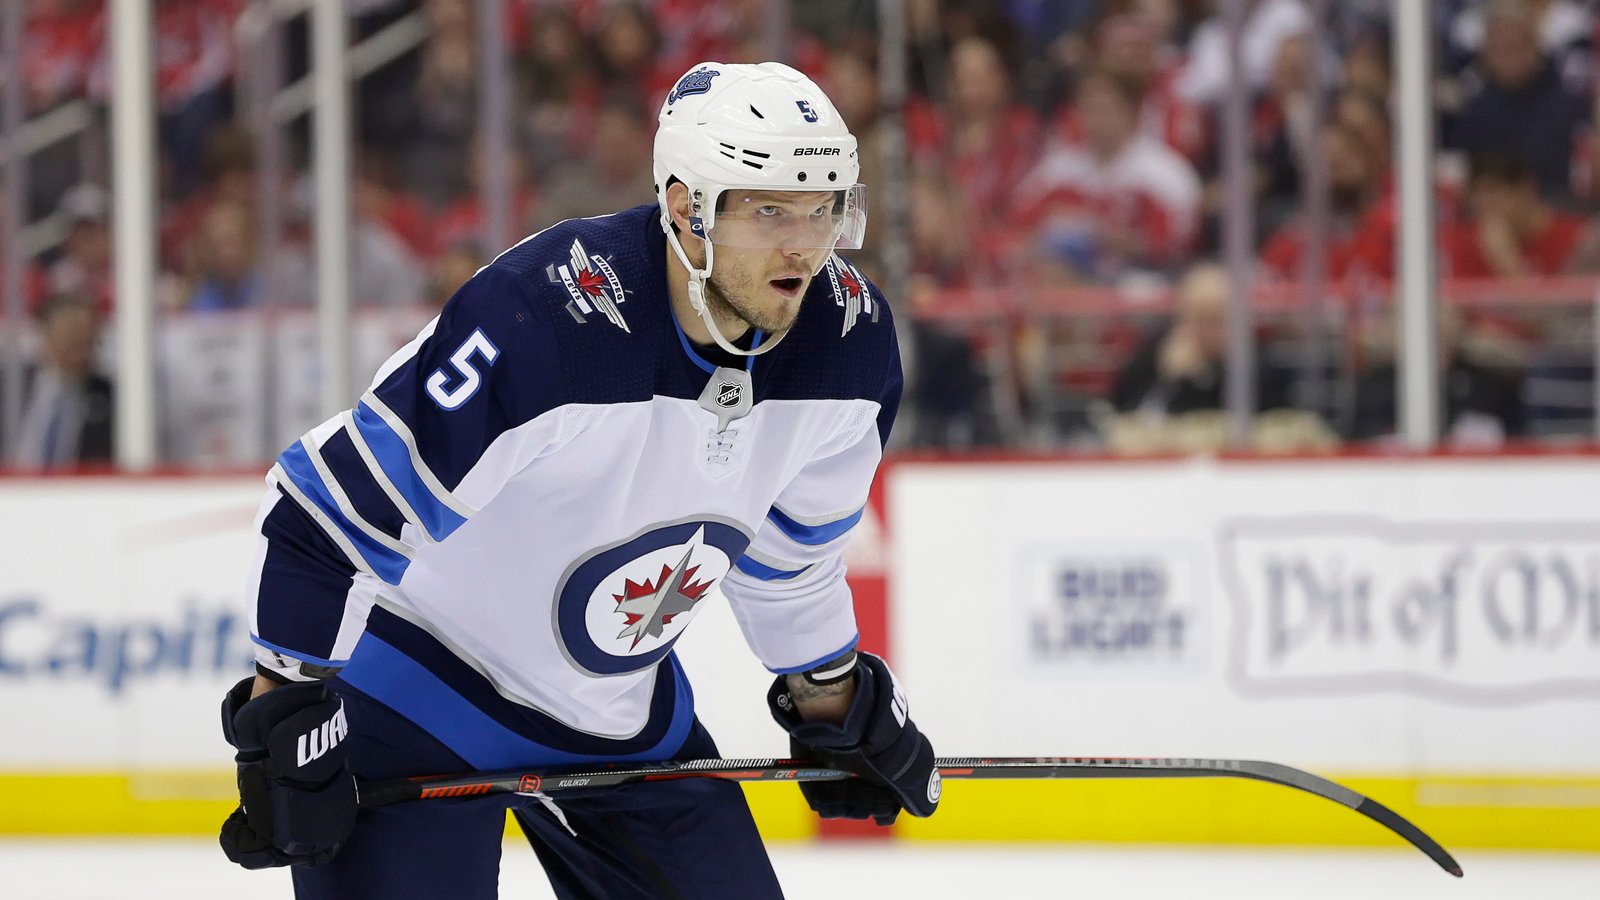 Dmitri Kulikov will be out of the Jets’ lineup long-term